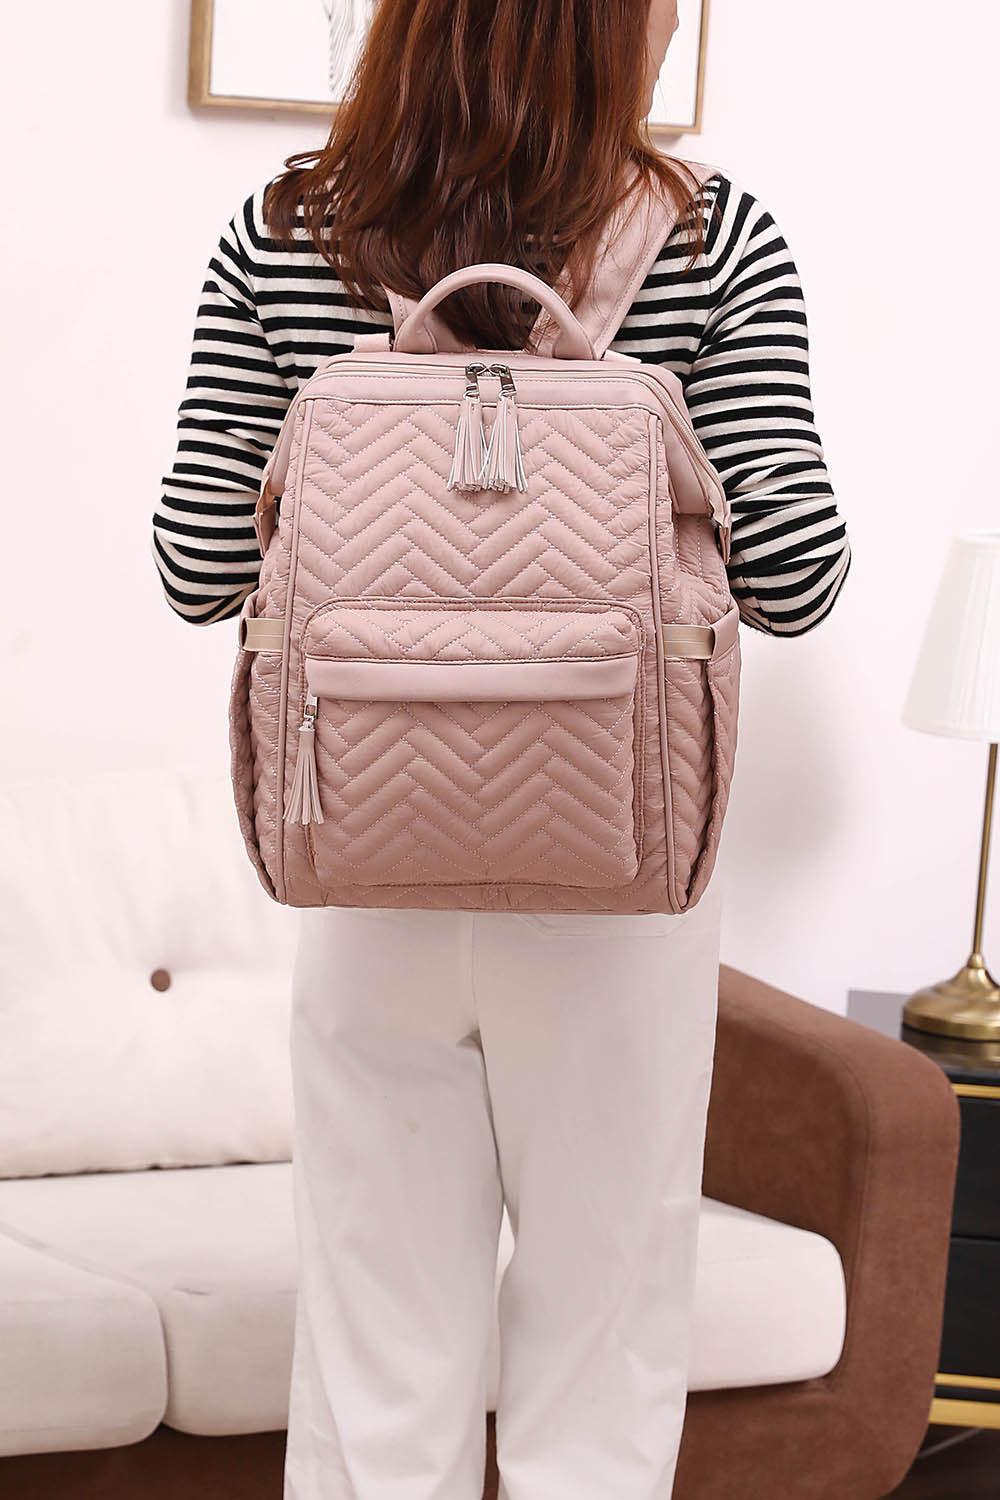 Stay Prepared in Style: Waterproof Mommy Backpack for On-the-Go Parents - Your-Look